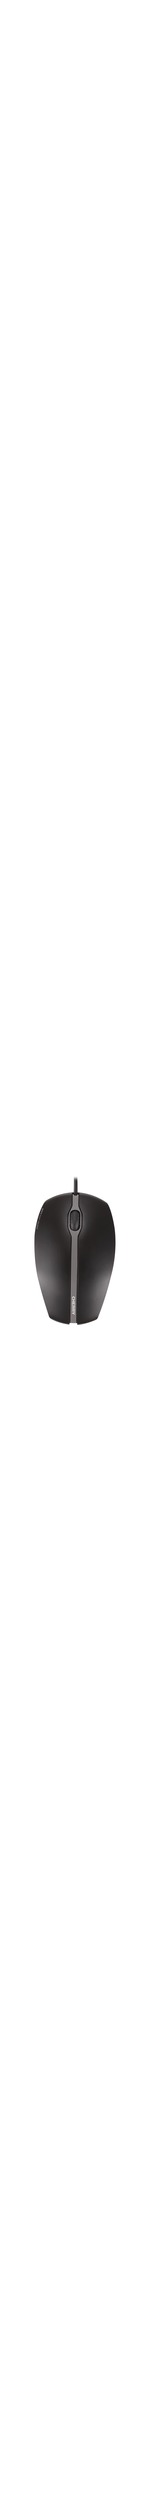 CHERRY GENTIX Silent Mouse - Optical - Cable - 3 Buttons - Black